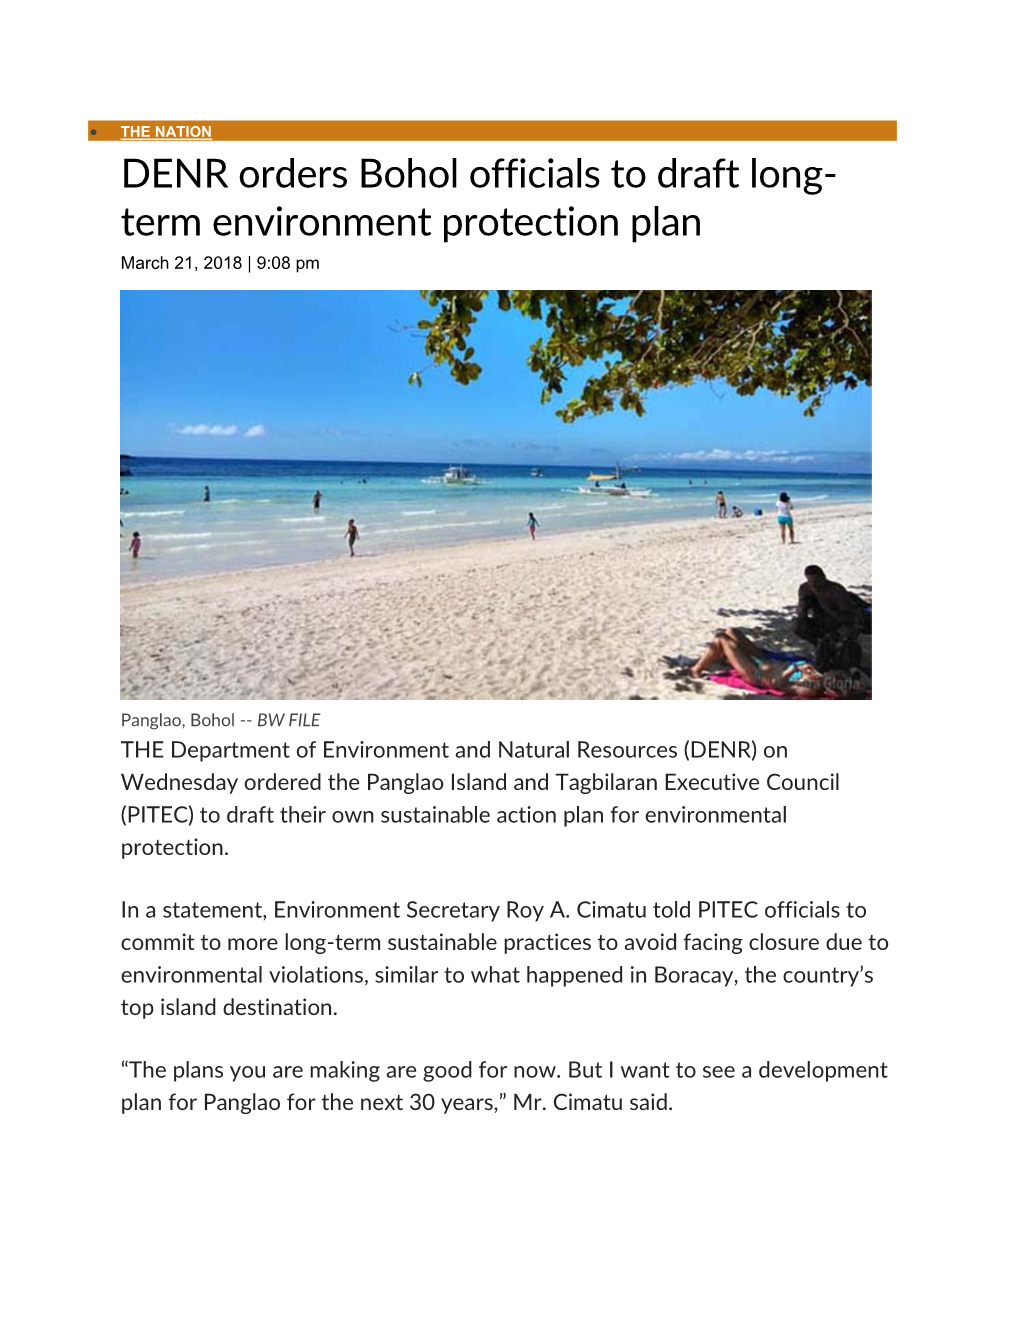 DENR Orders Bohol Officials to Draft Long- Term Environment Protection Plan March 21, 2018 | 9:08 Pm